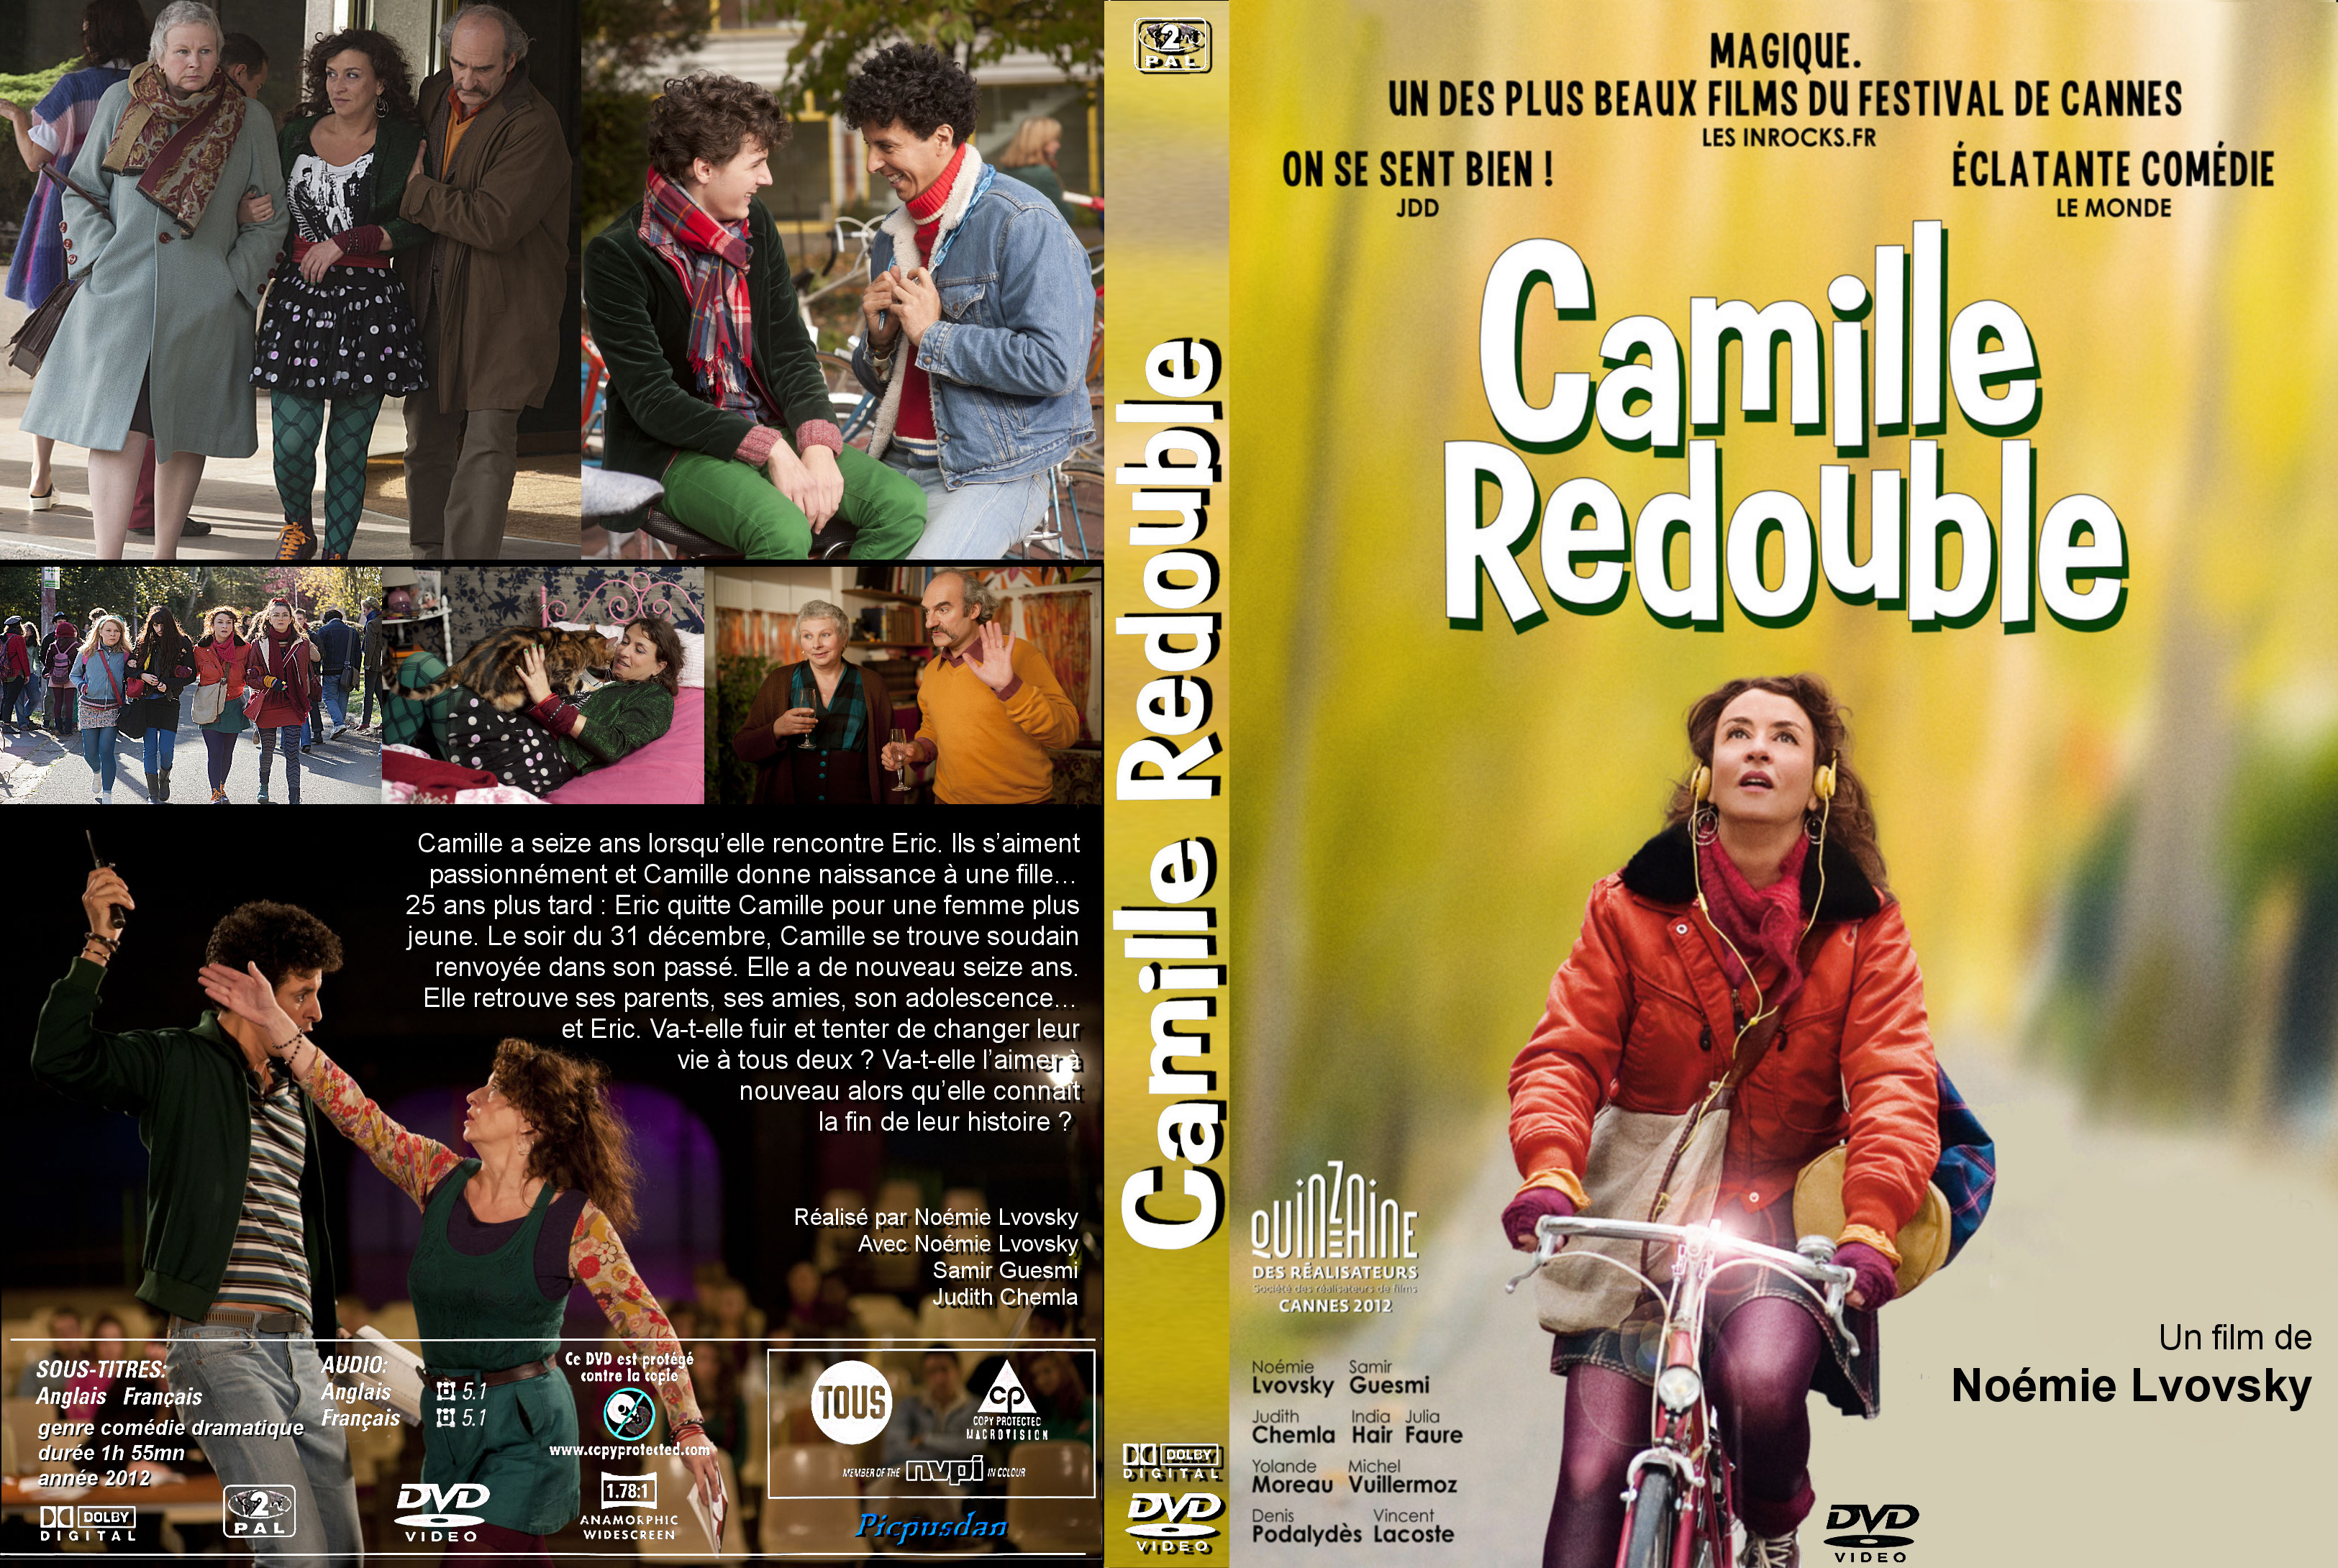 Jaquette DVD Camille redouble custom